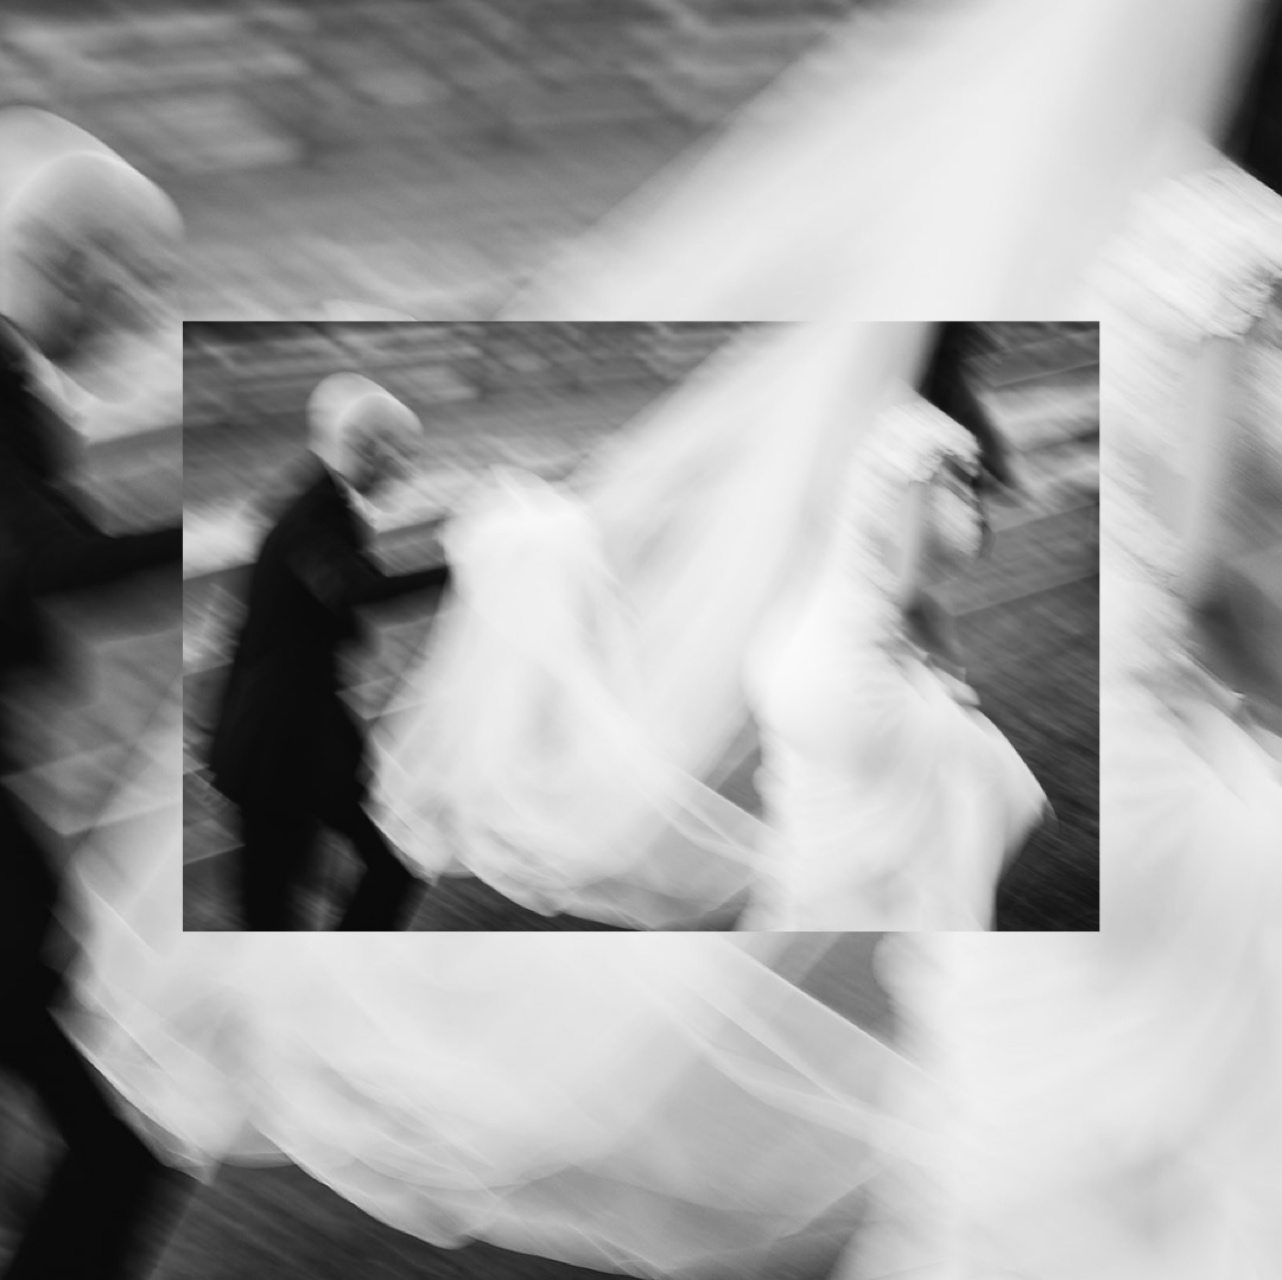 A blurry image of the groom holding the bride's veil as she walks.